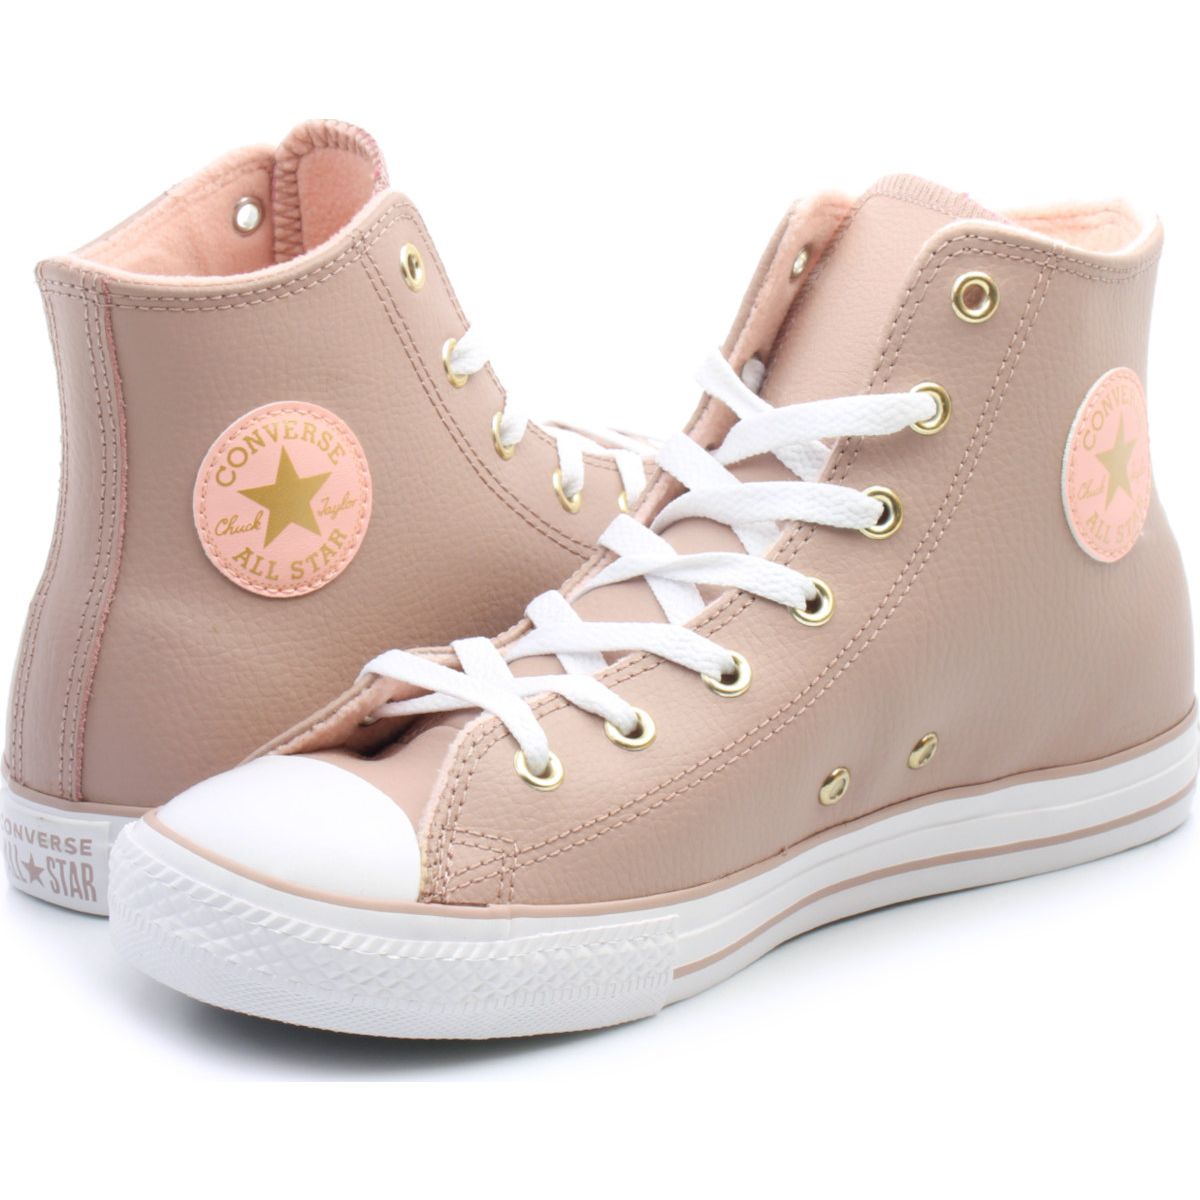 Converse All Star Chuck Taylor Hi Leather Junior Shoes 66185